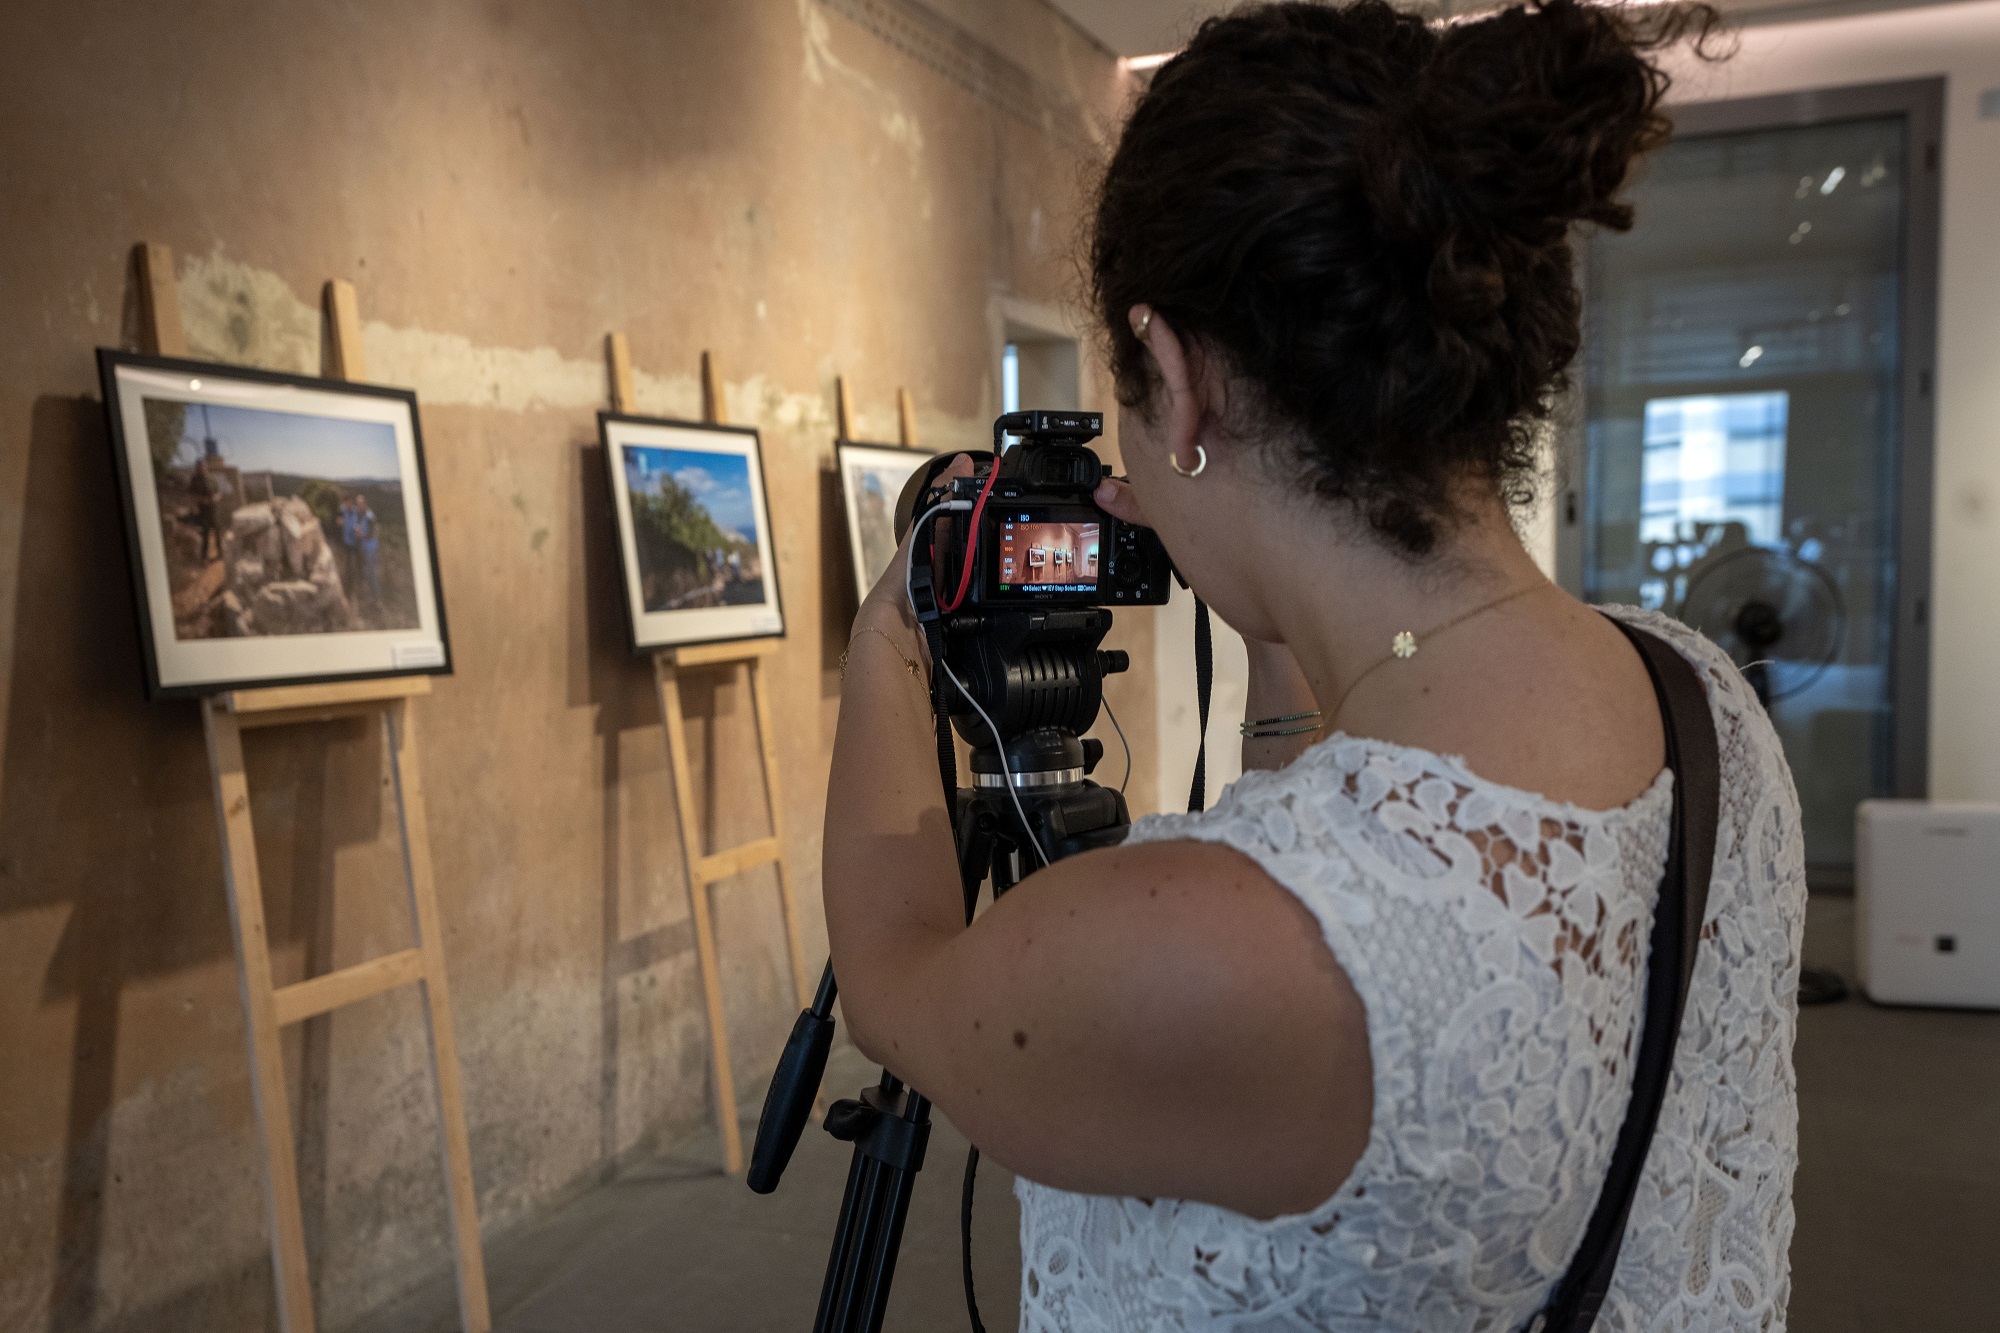 Photo Exhibition Celebrates 75 Years Of Un Peacekeeping And 45 Years Of Unifil In South Lebanon